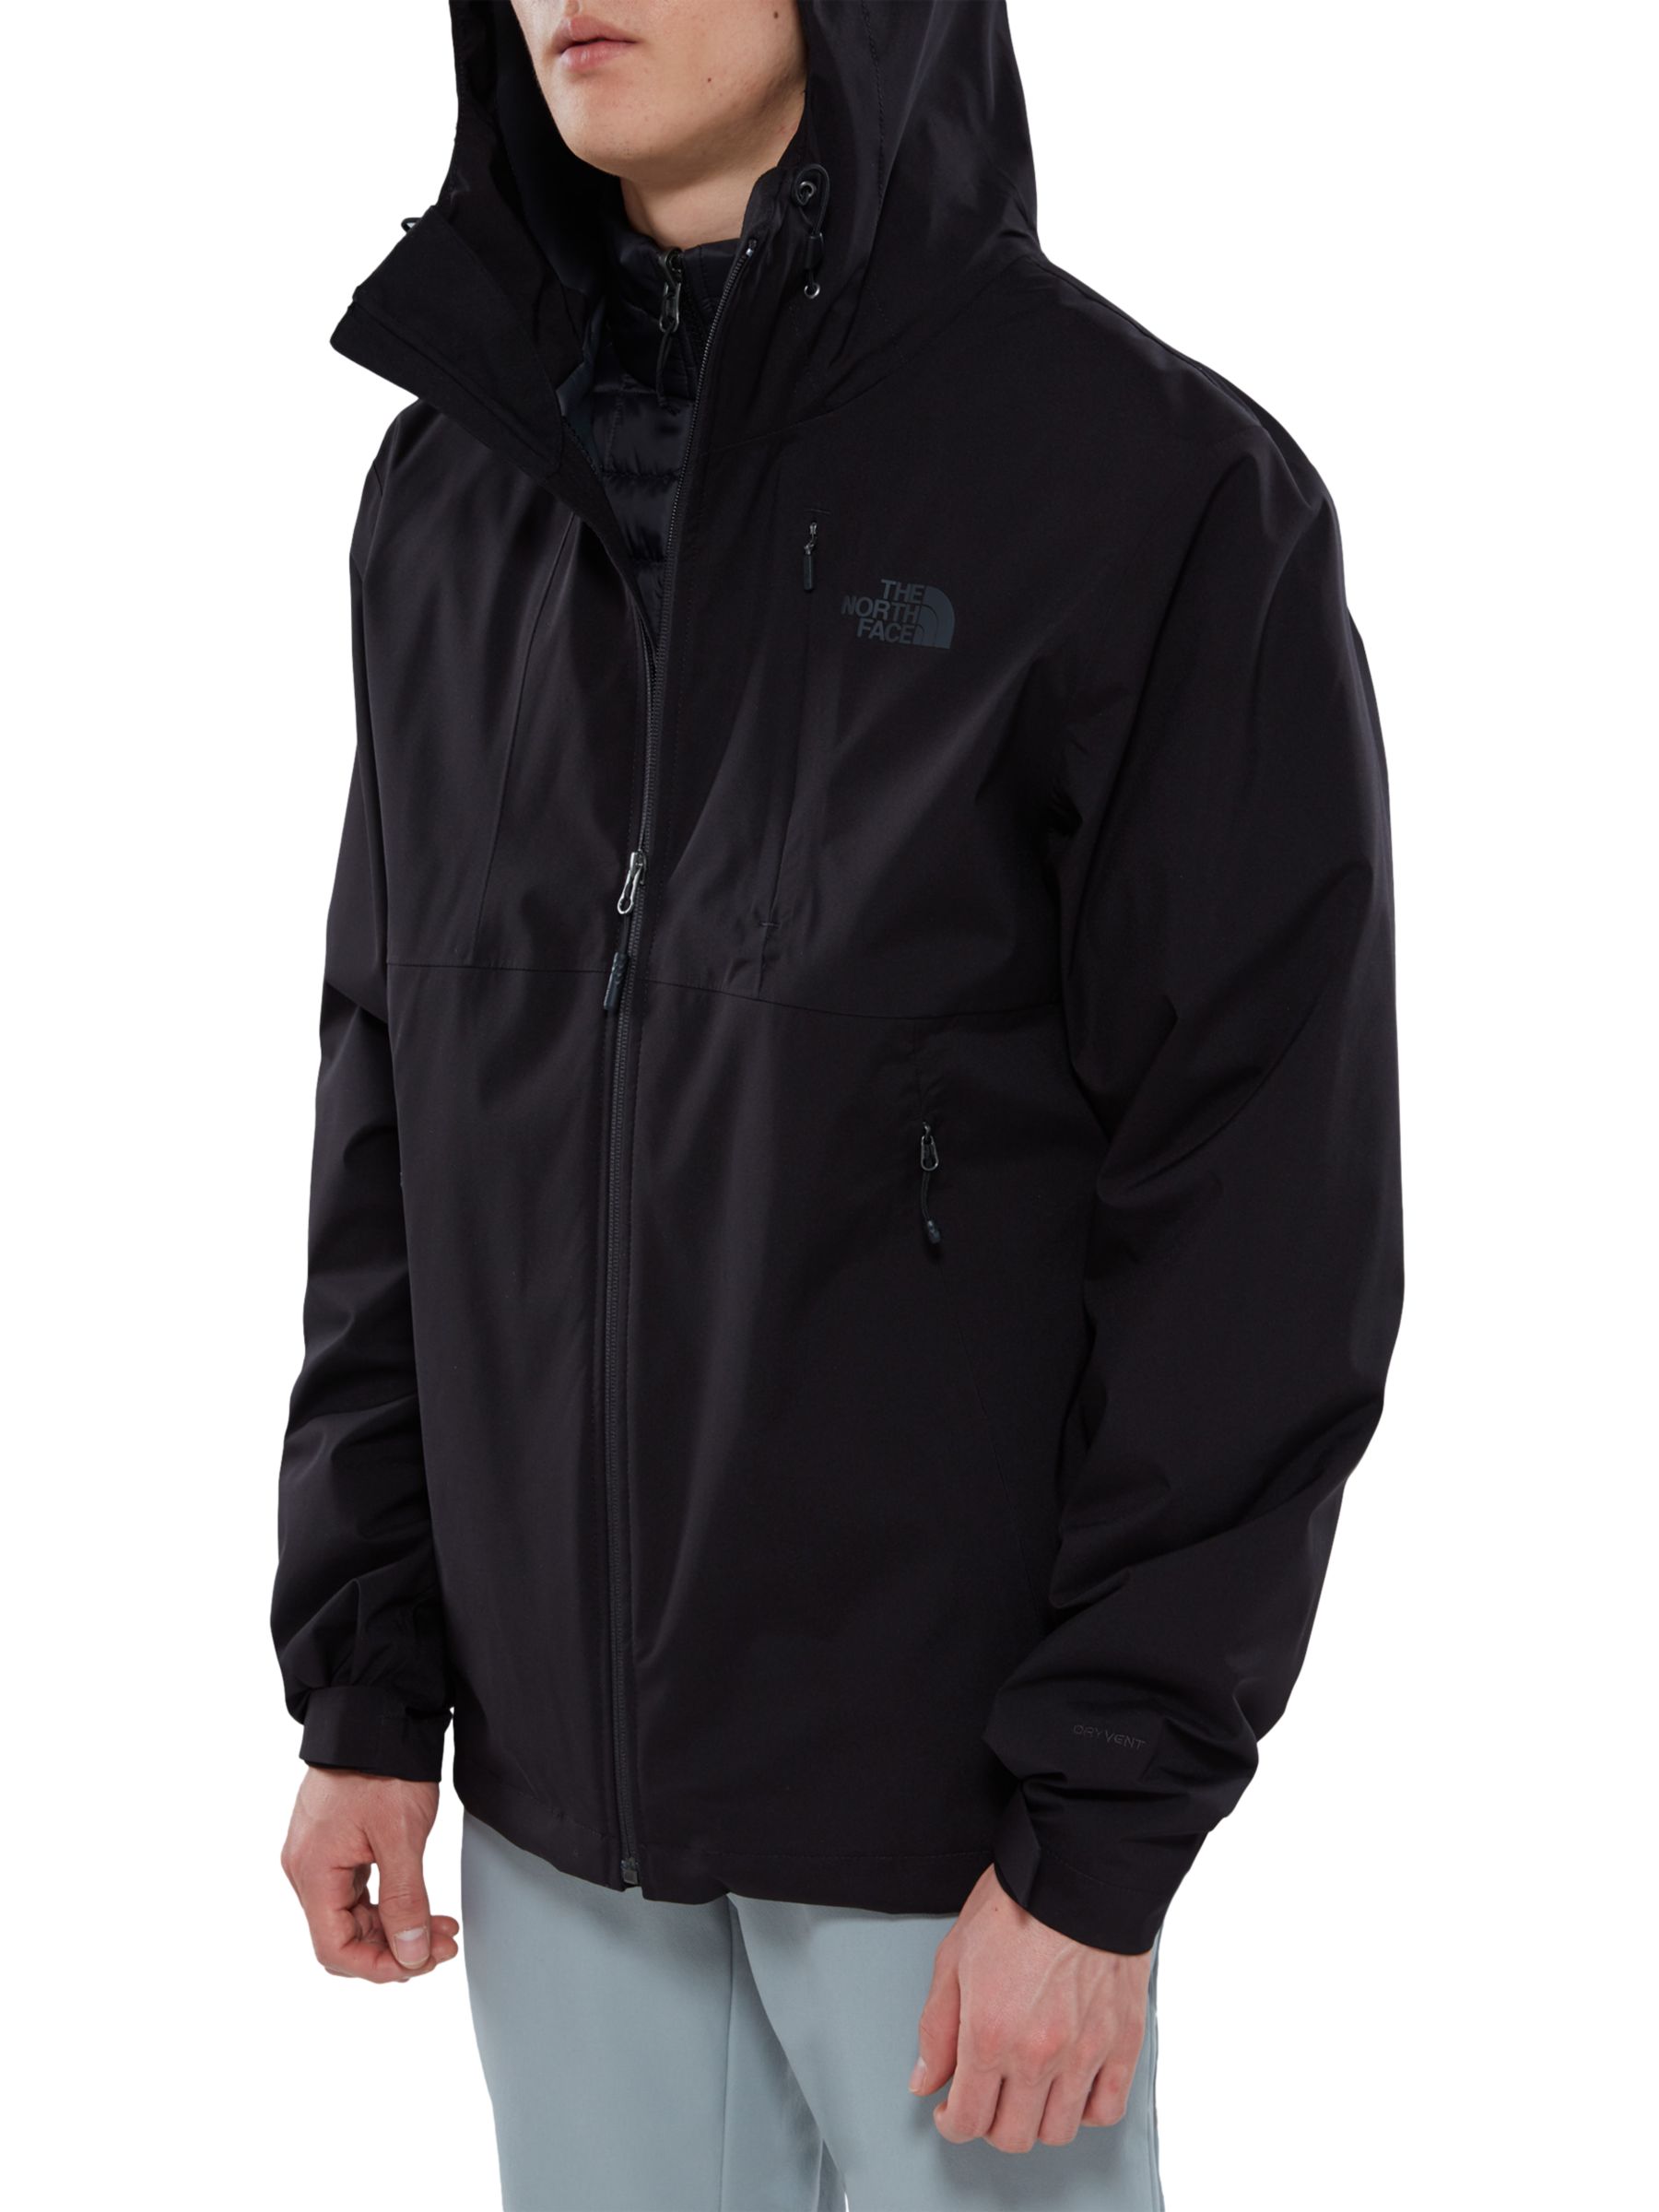 north face men's thermoball triclimate jacket